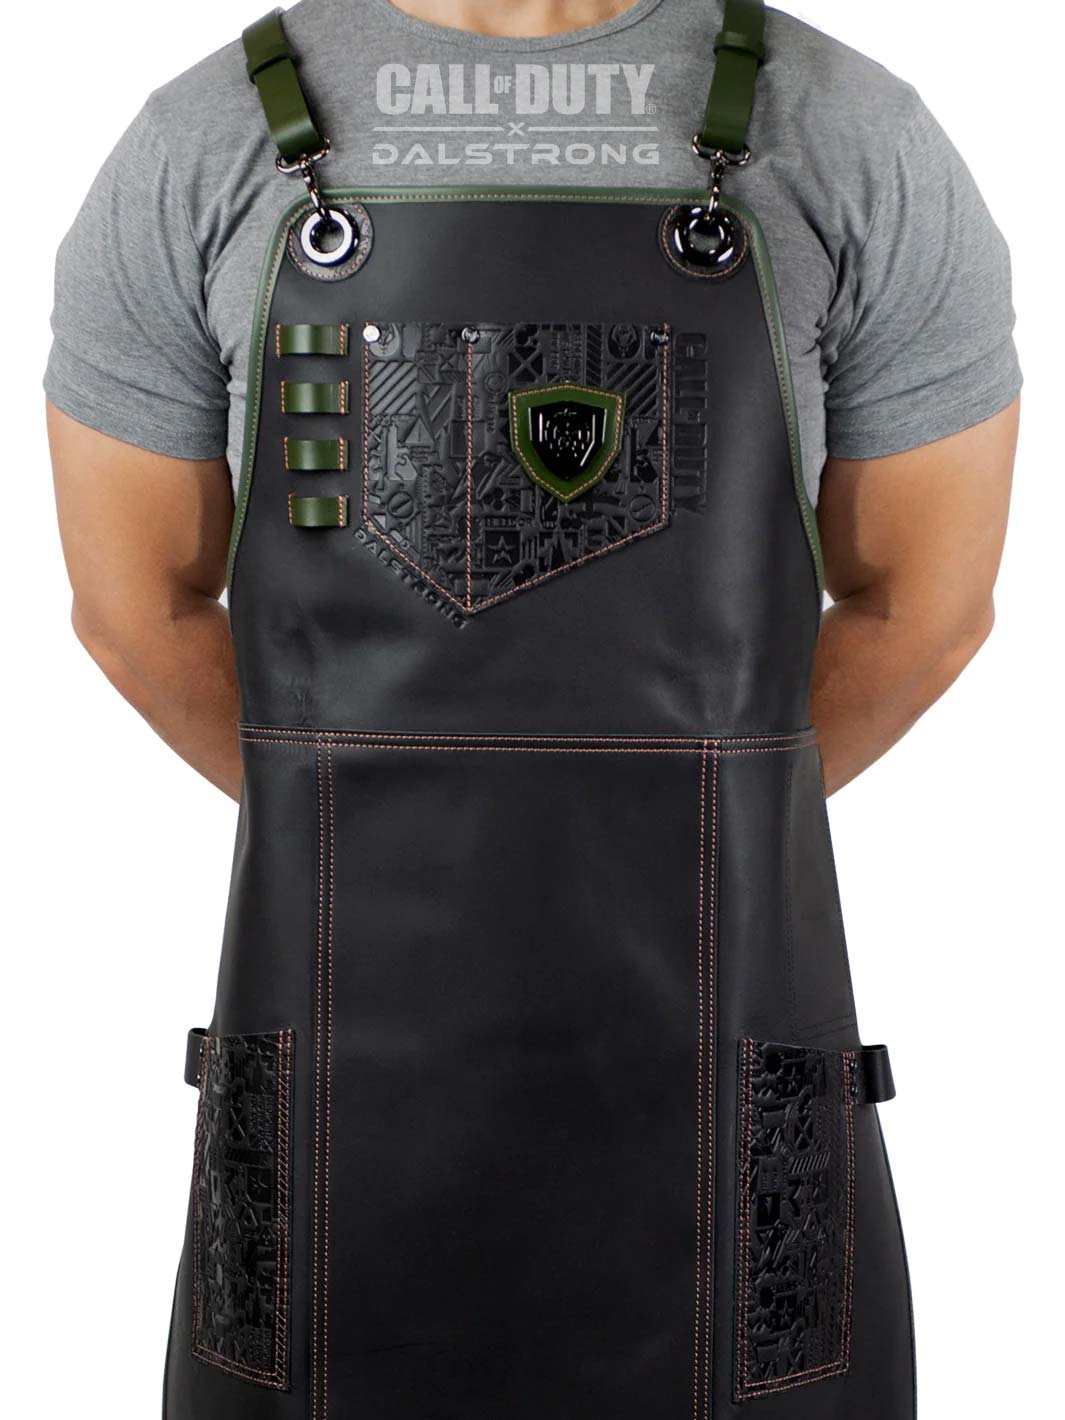 Limited Edition Chef Leather Apron | Call of Duty © Edition | Black Genuine Leather | EXCLUSIVE COLLECTOR SET | Dalstrong ©